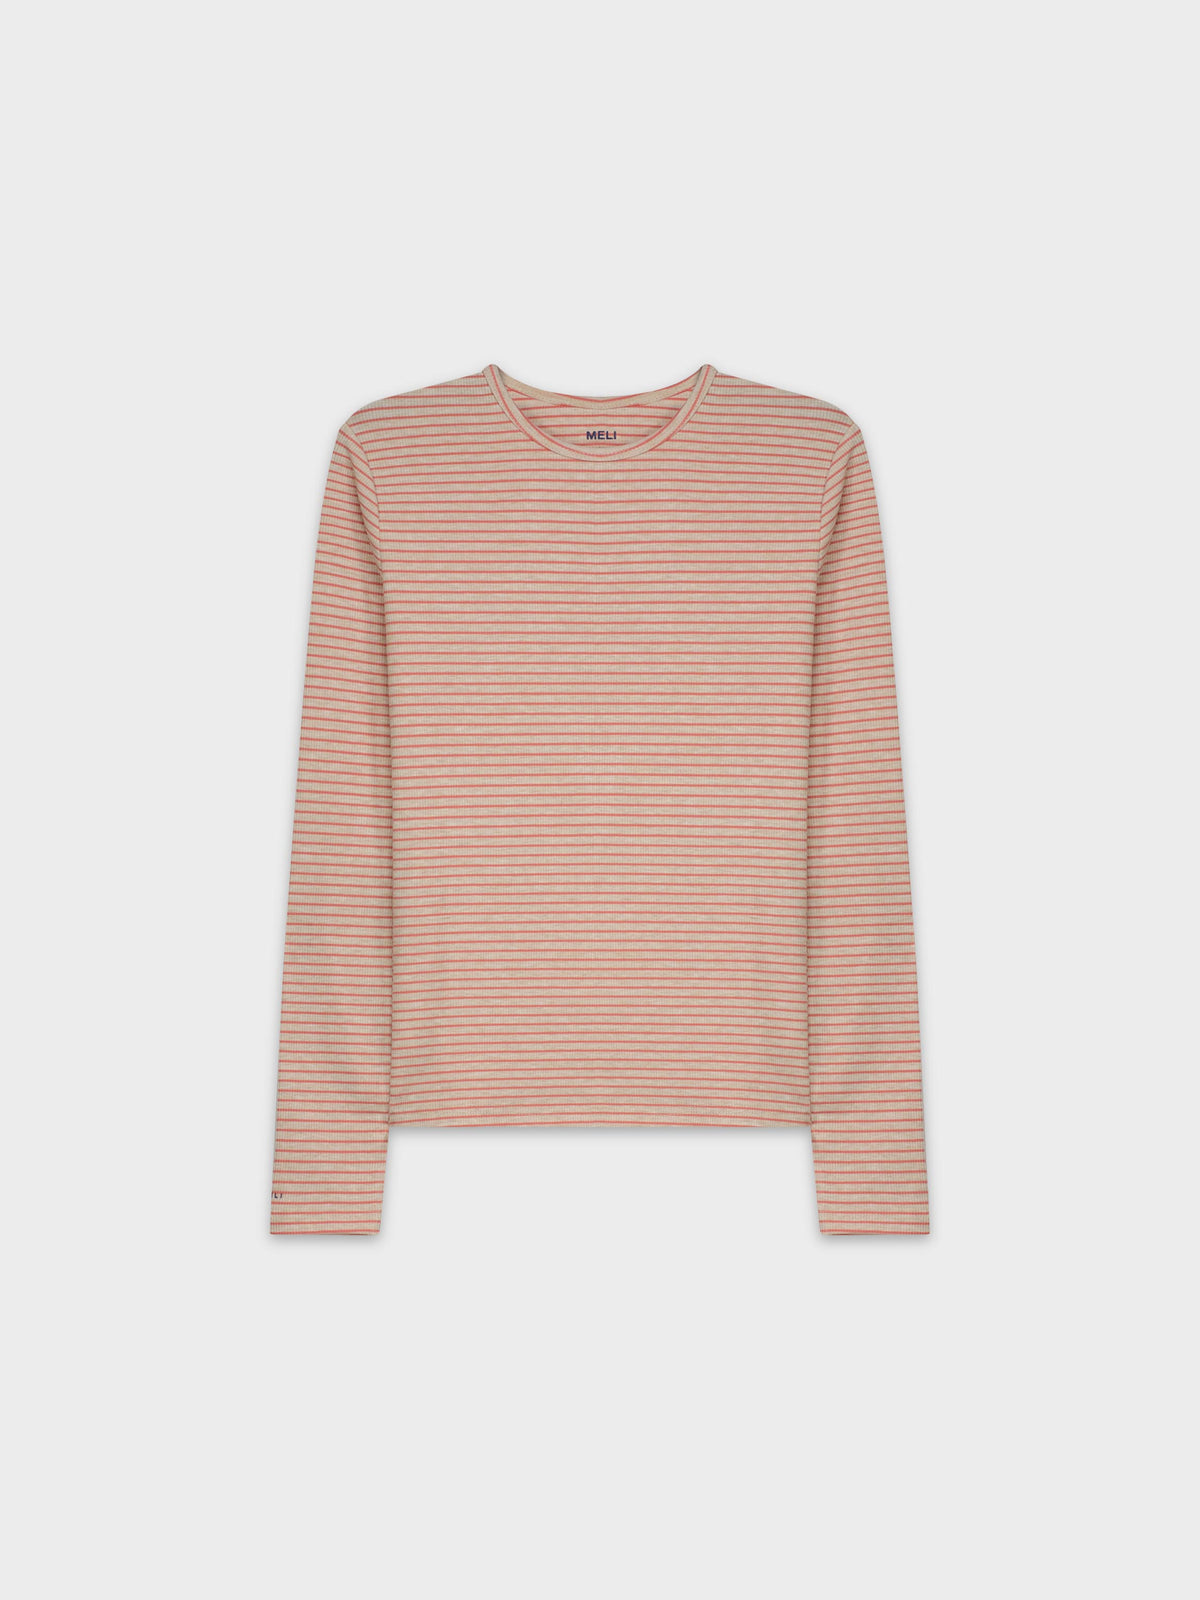 RIBBED STRIPED CREW-HEATHERED TAN/CORAL